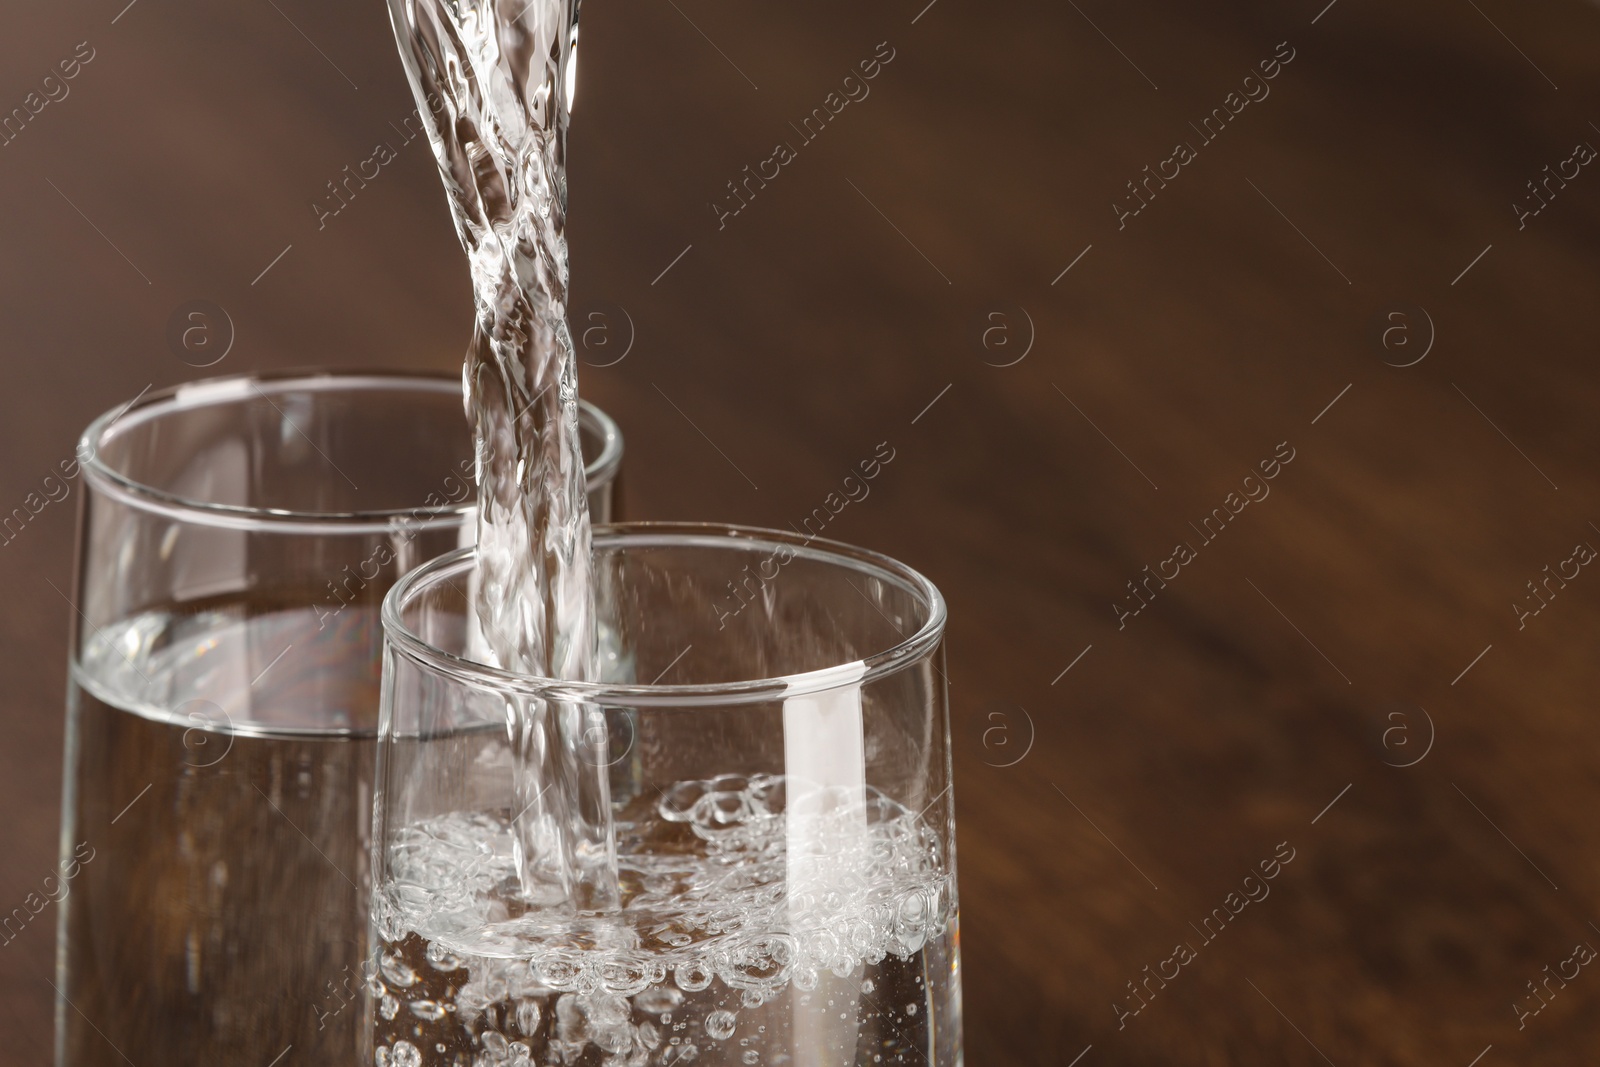 Photo of Pouring water into glass against blurred background, closeup. Space for text